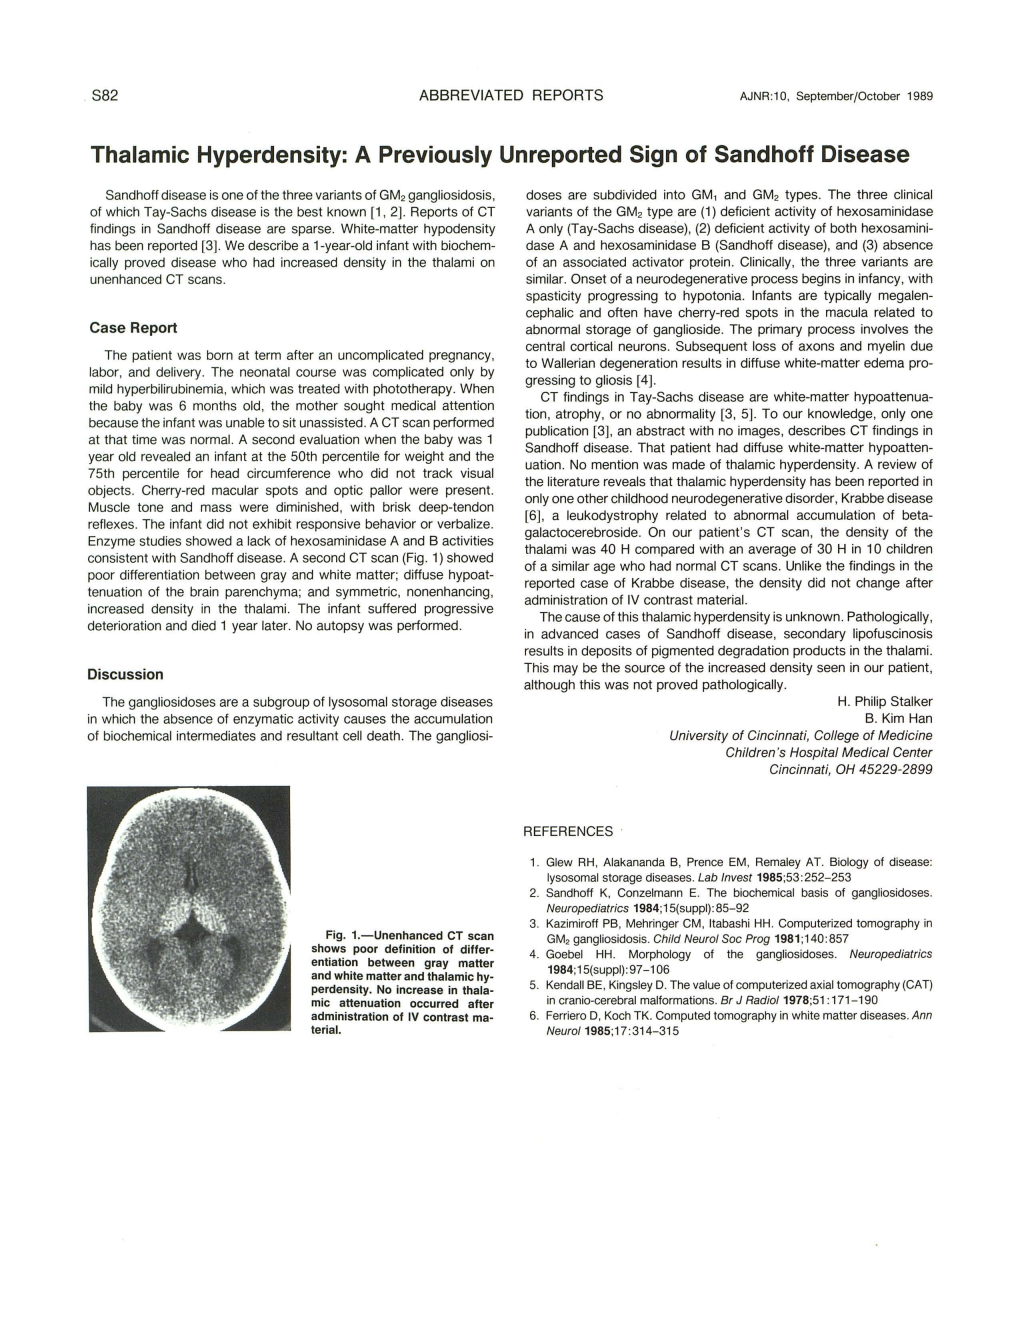 Thalamic Hyperdensity: a Previously Unreported Sign of Sandhoff Disease